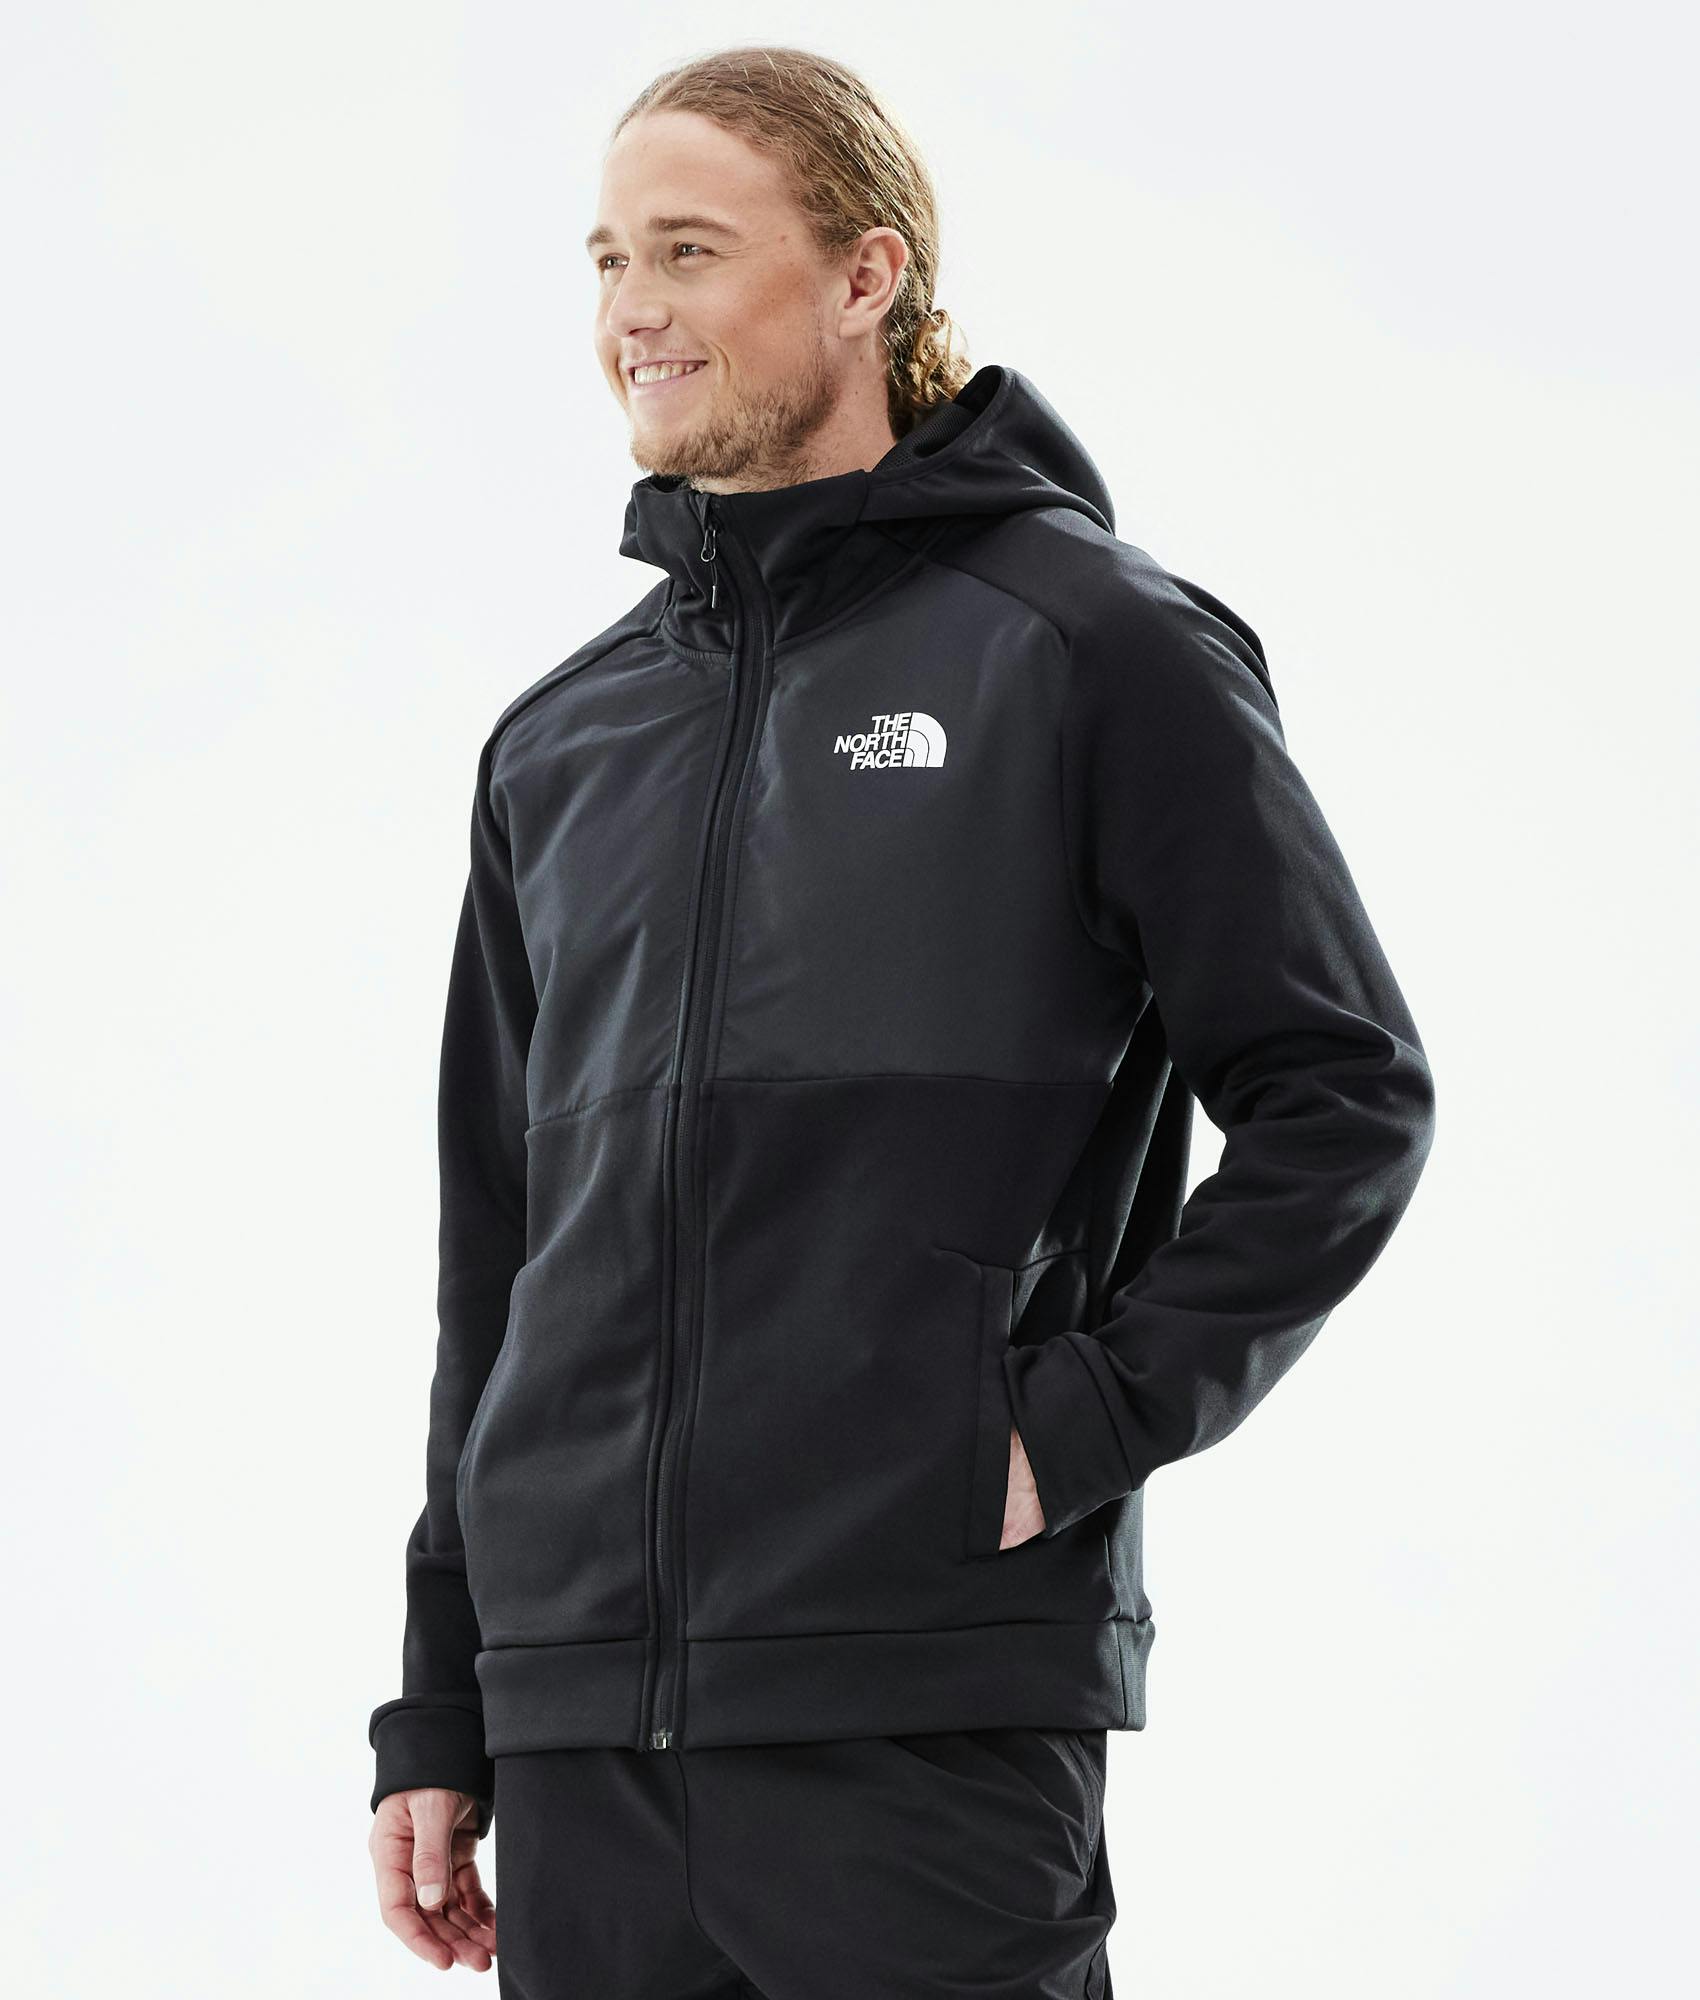 The North Face MA Full Zip